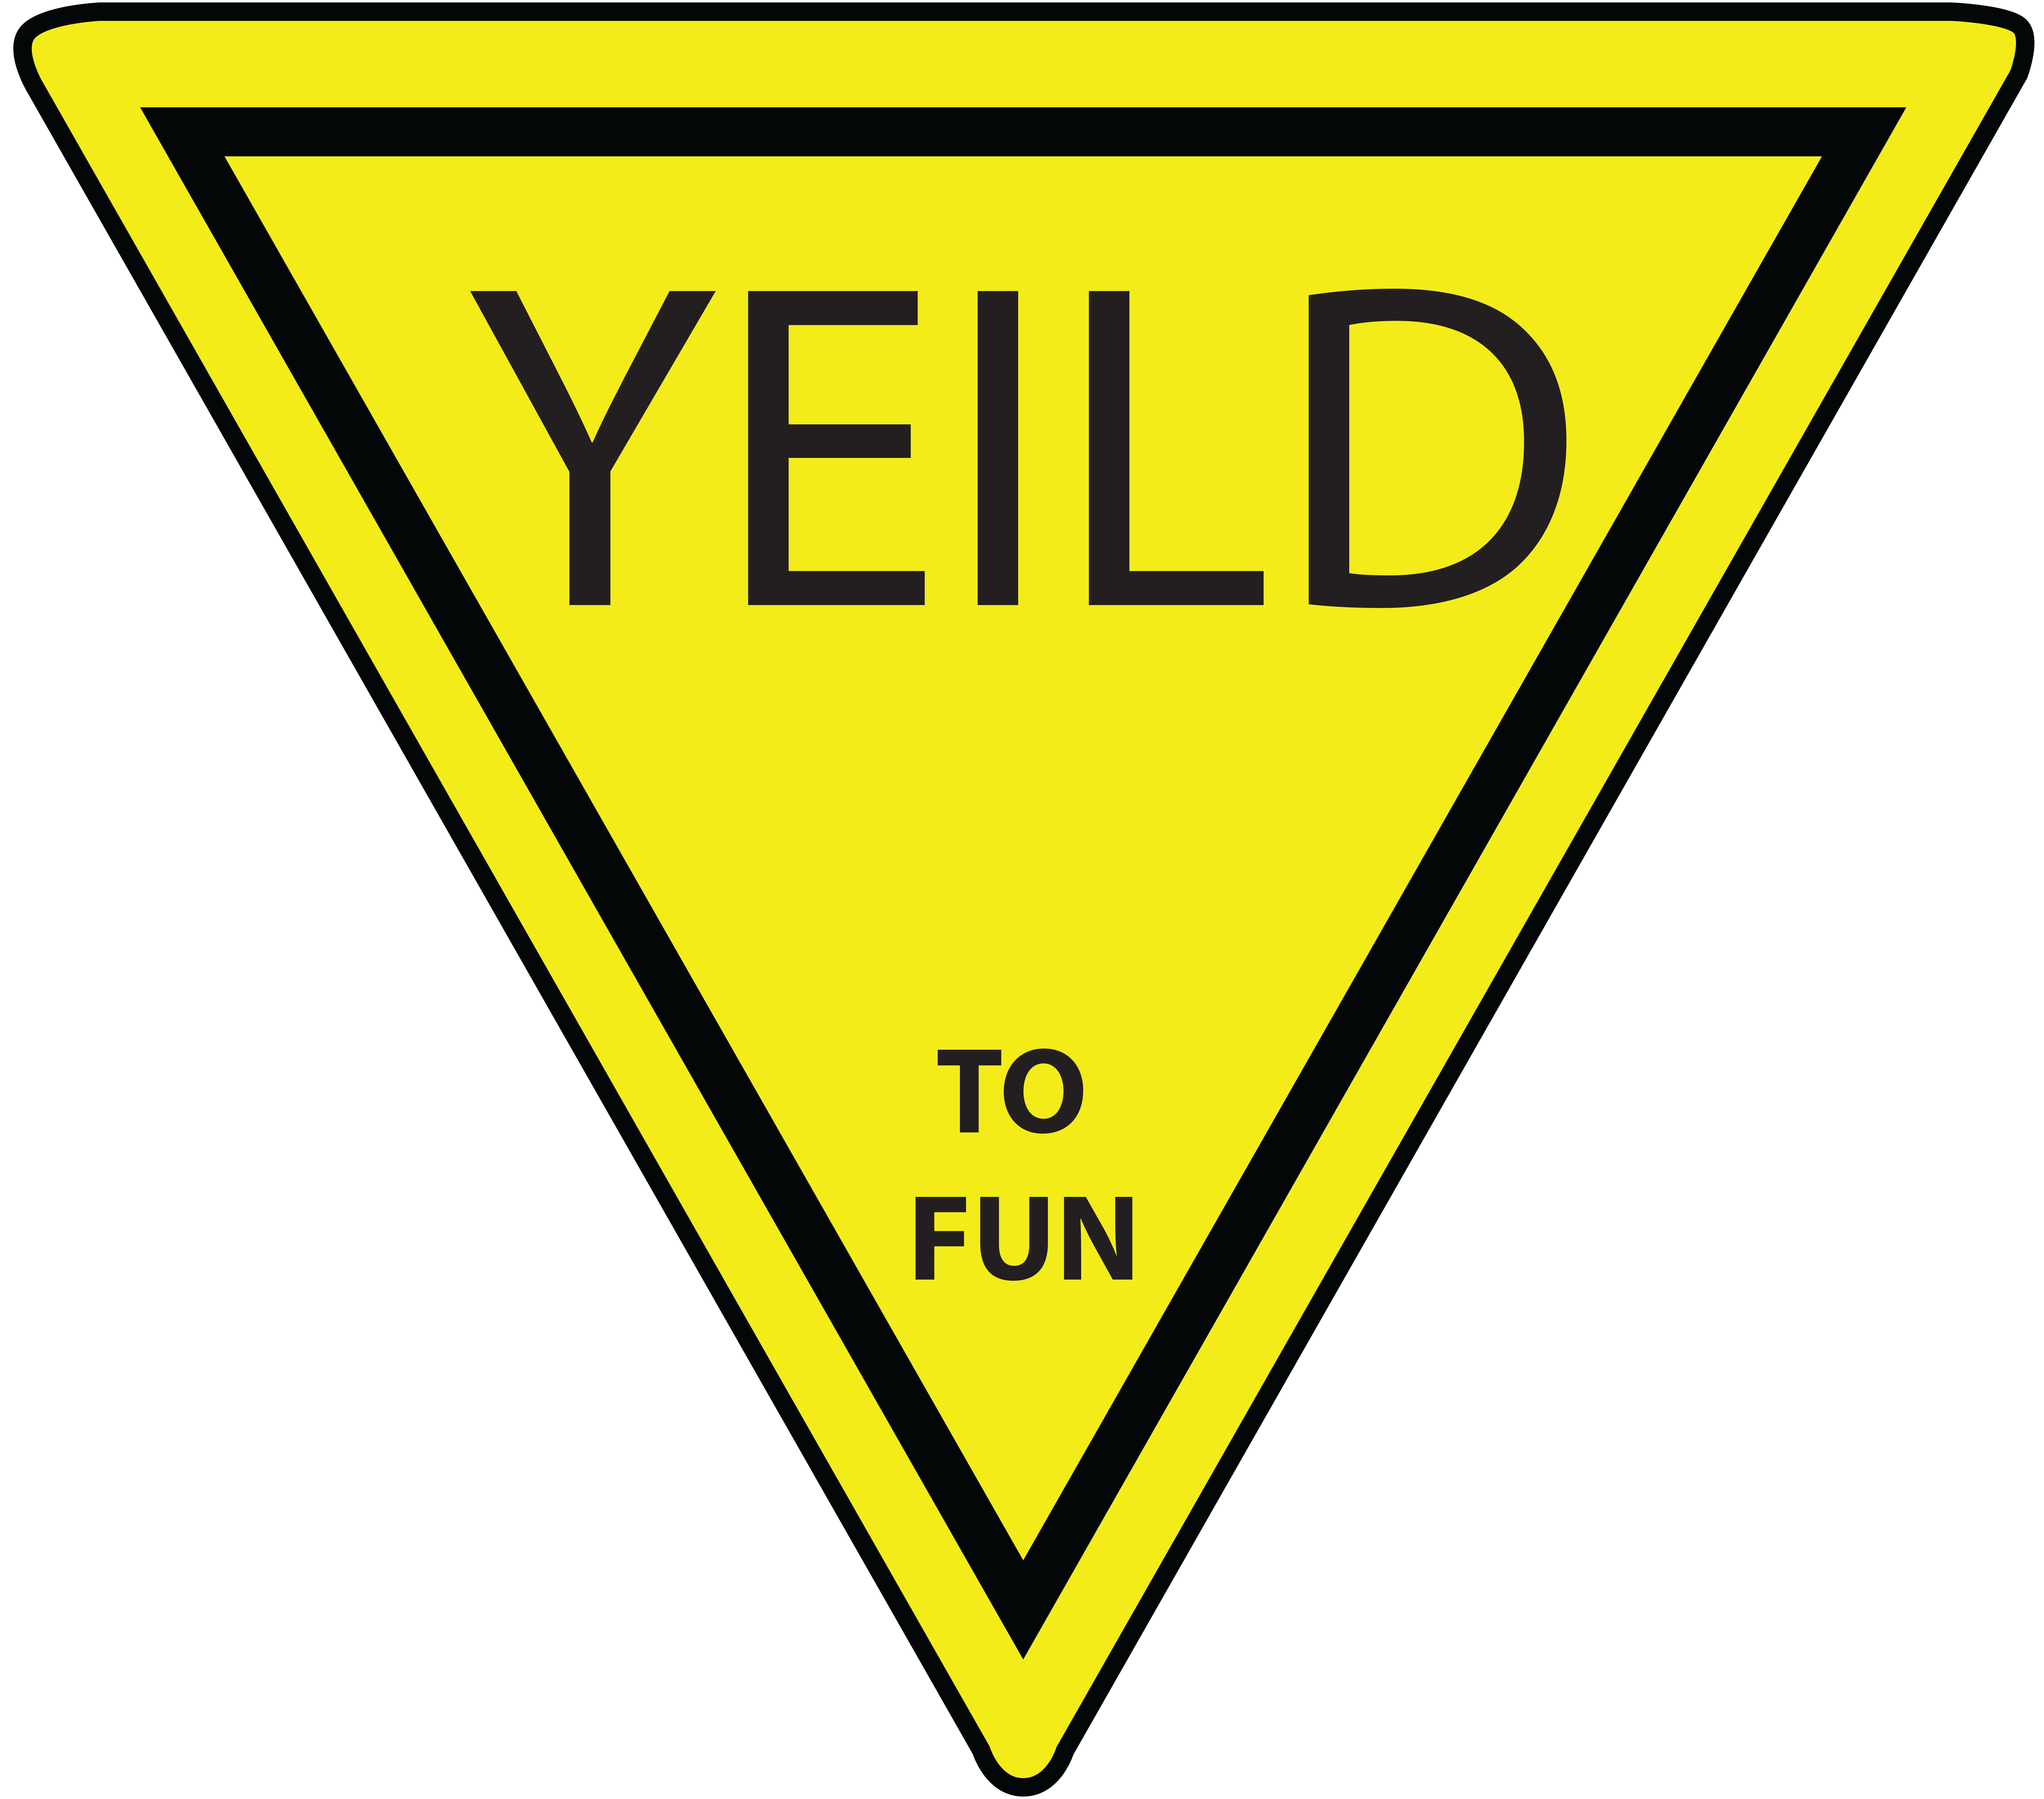 Yield Sign Clipart - Free Clipart Images